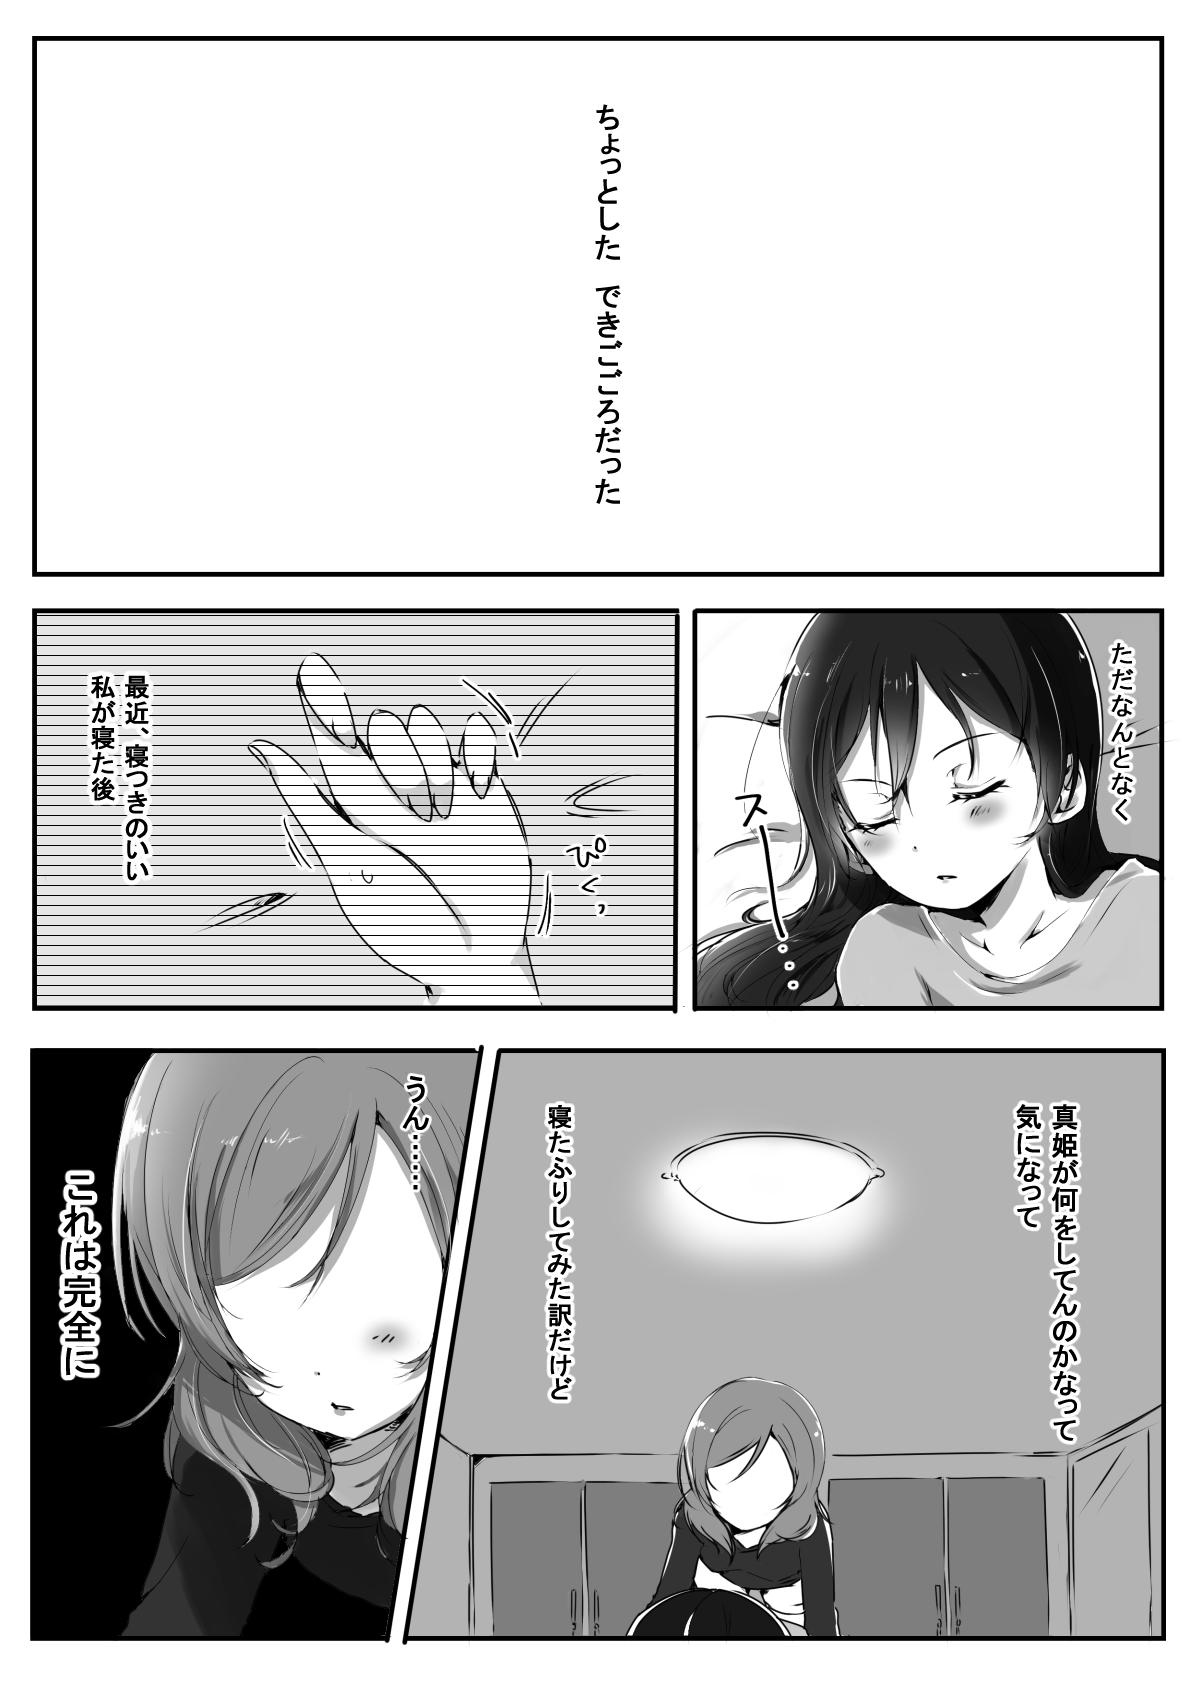 Female Domination Kanojo - Love live Gay Physicalexamination - Page 2